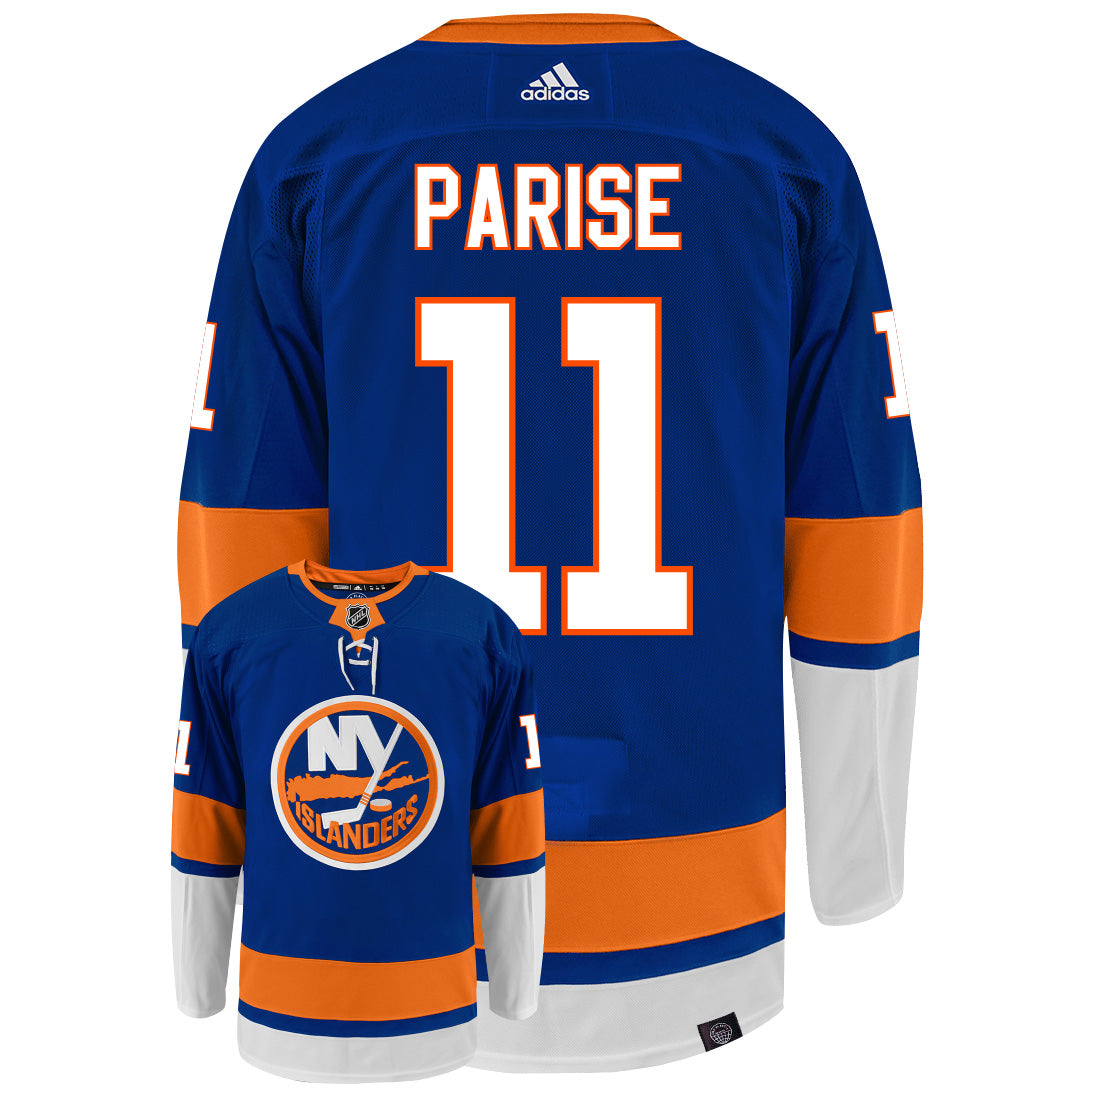 Zach Parise New York Islanders Adidas Primegreen Authentic NHL Hockey Jersey - Back/Front View